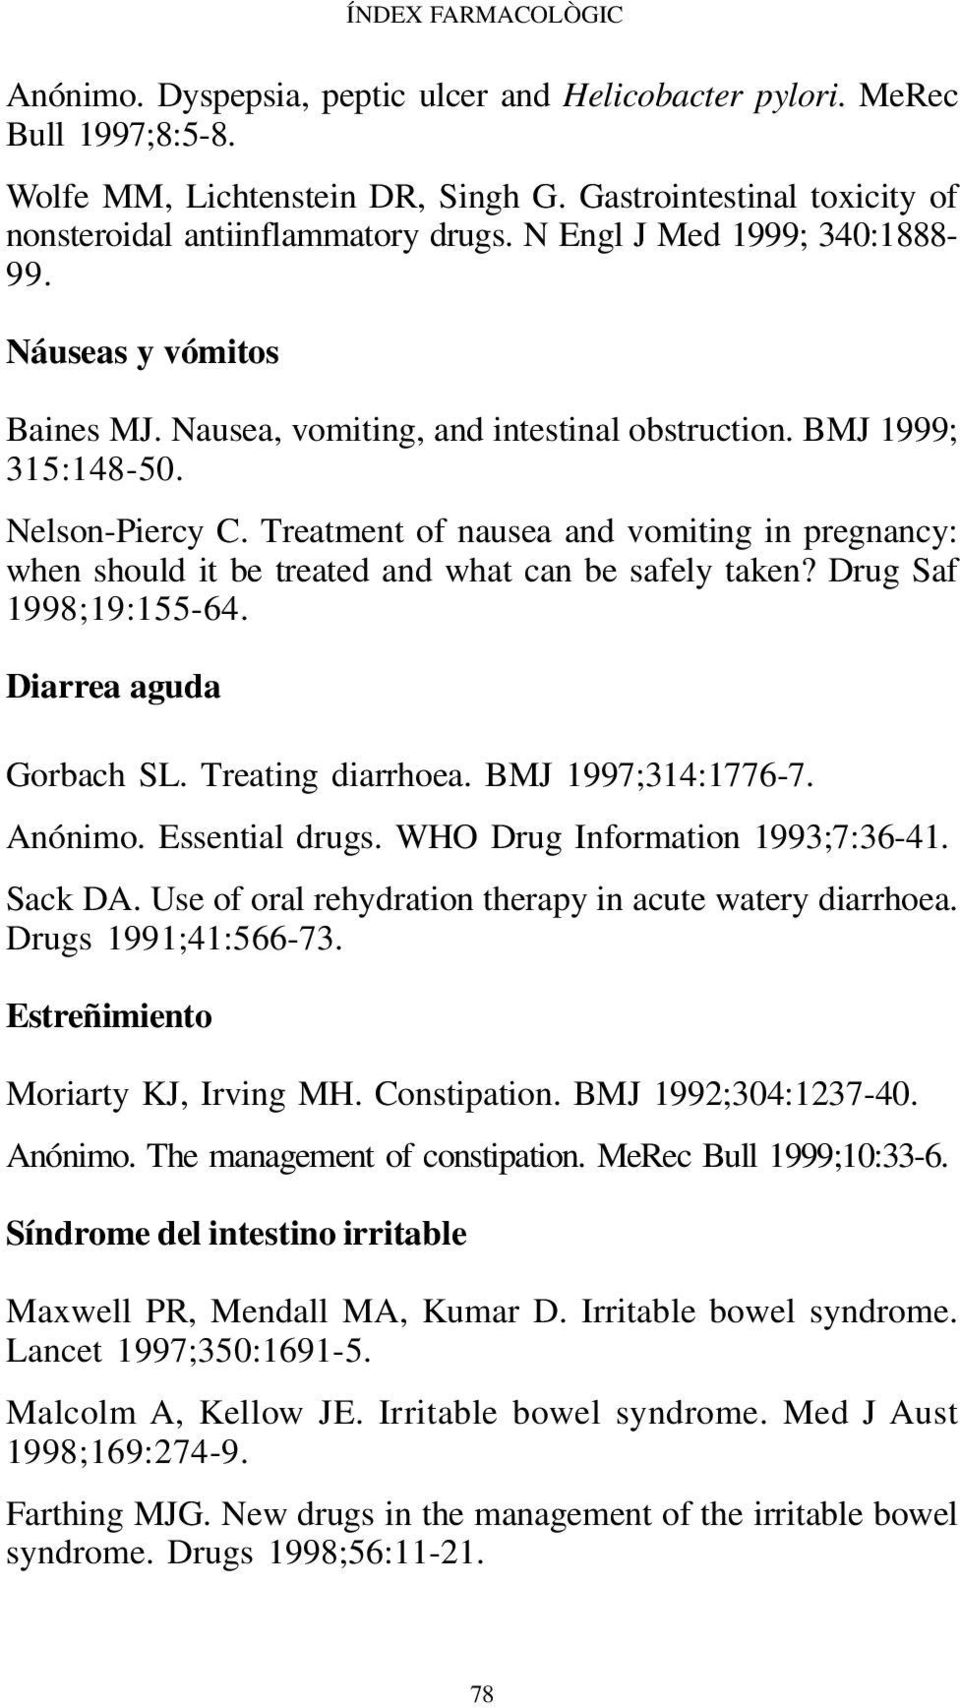 Nelson-Piercy C. Treatment of nausea and vomiting in pregnancy: when should it be treated and what can be safely taken? Drug Saf 1998;19:155-64. Diarrea aguda Gorbach SL. Treating diarrhoea.